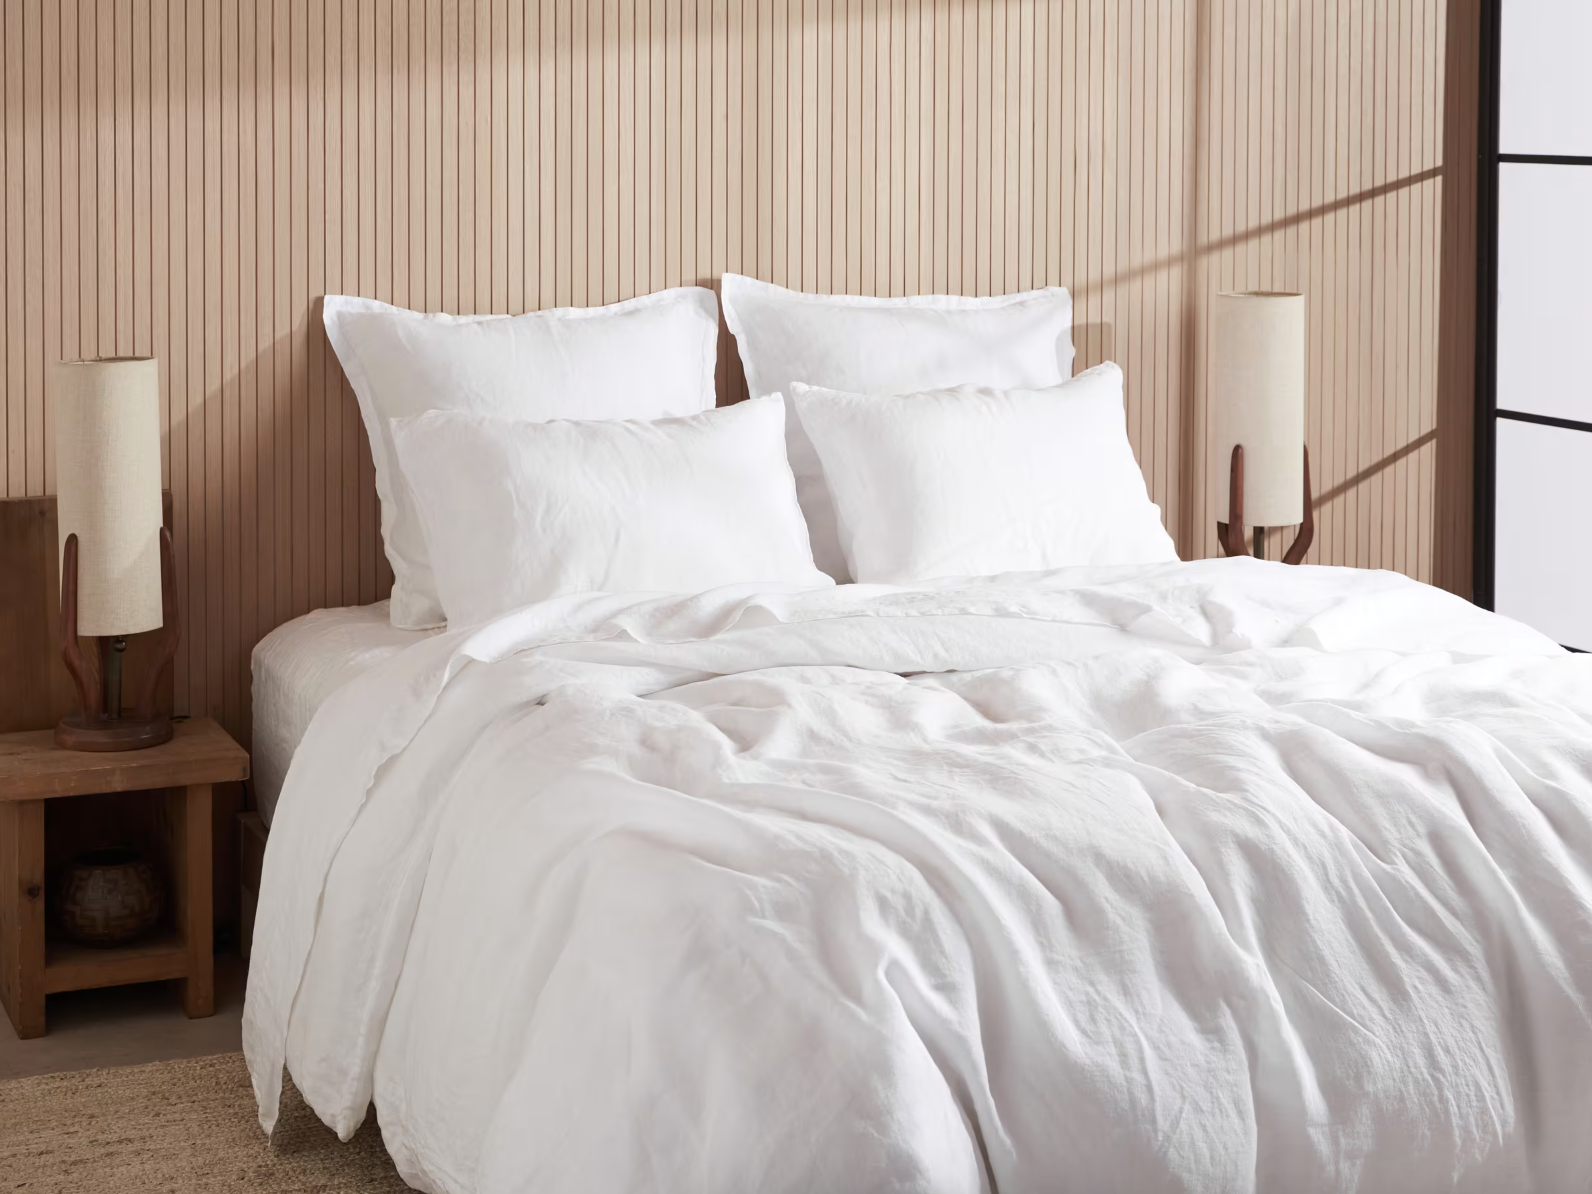 7 Luxury Sheet Sets That Redefine The Art Of A Good Night's Rest